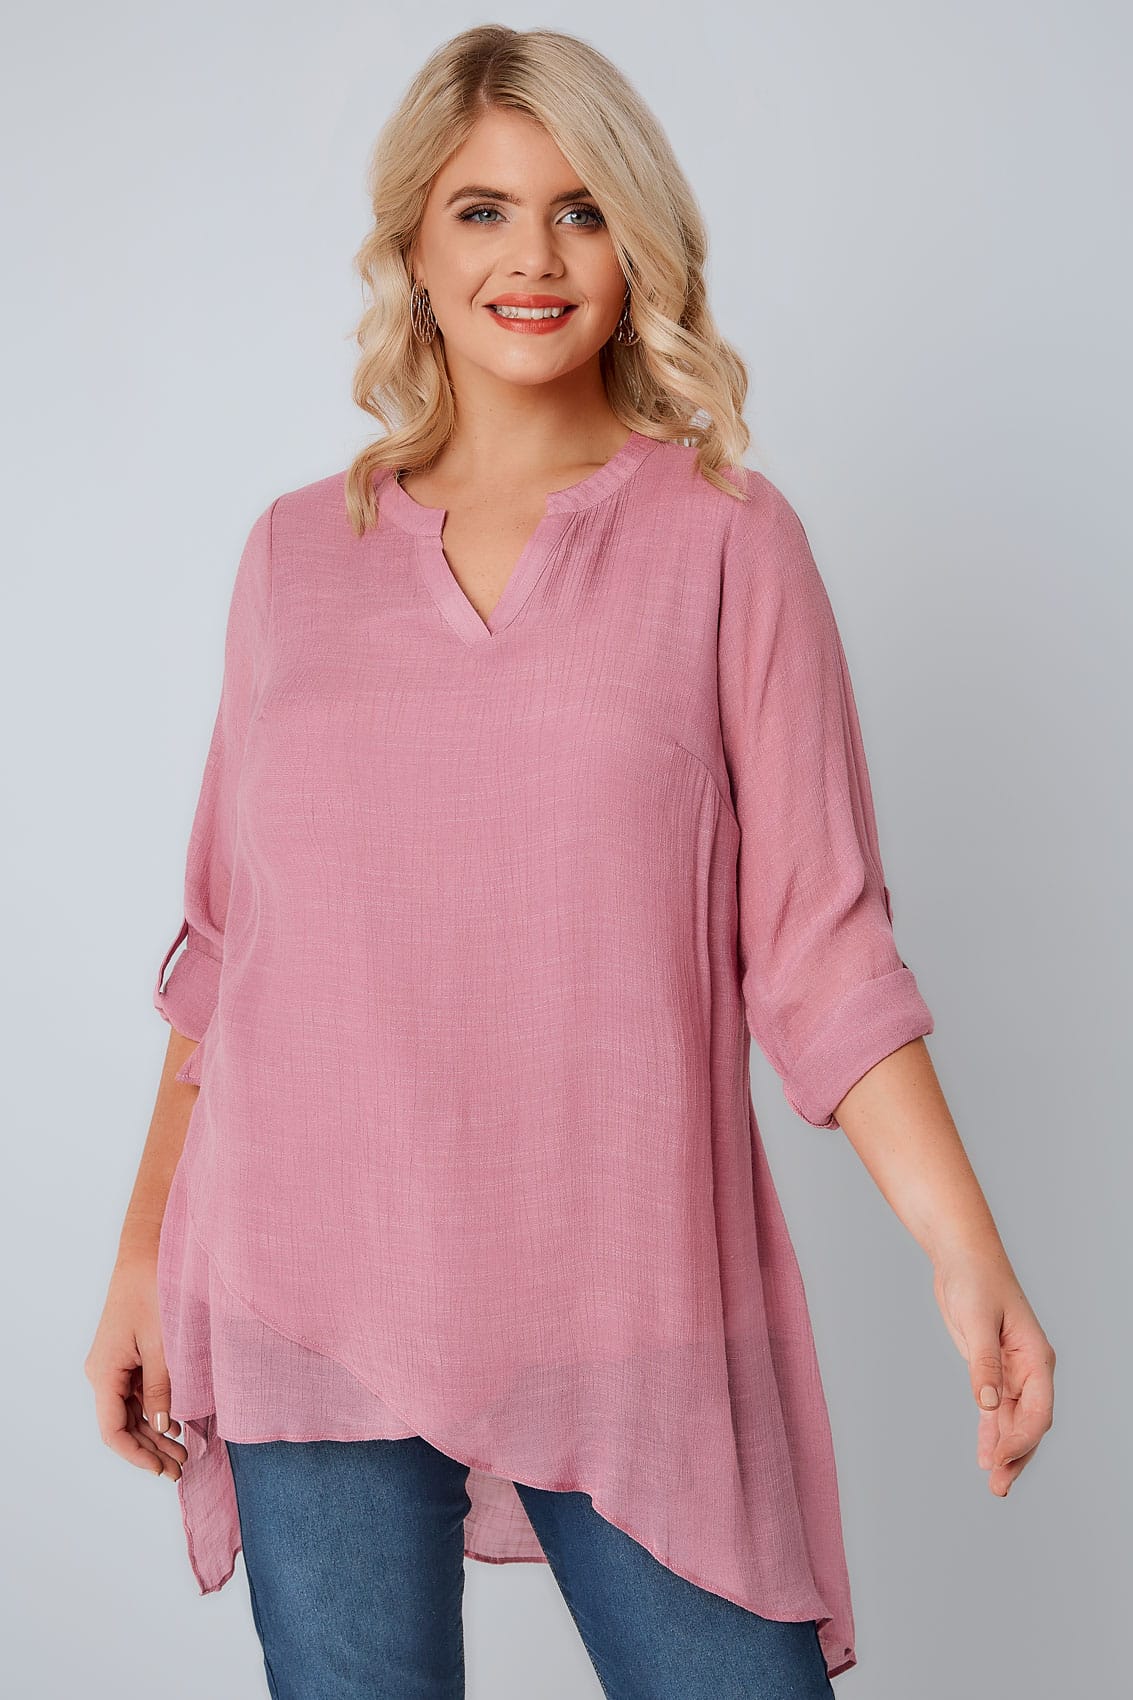 Dusky Pink Layered Blouse With Notch Neck & Dipped Hem, Plus size 16 to 36